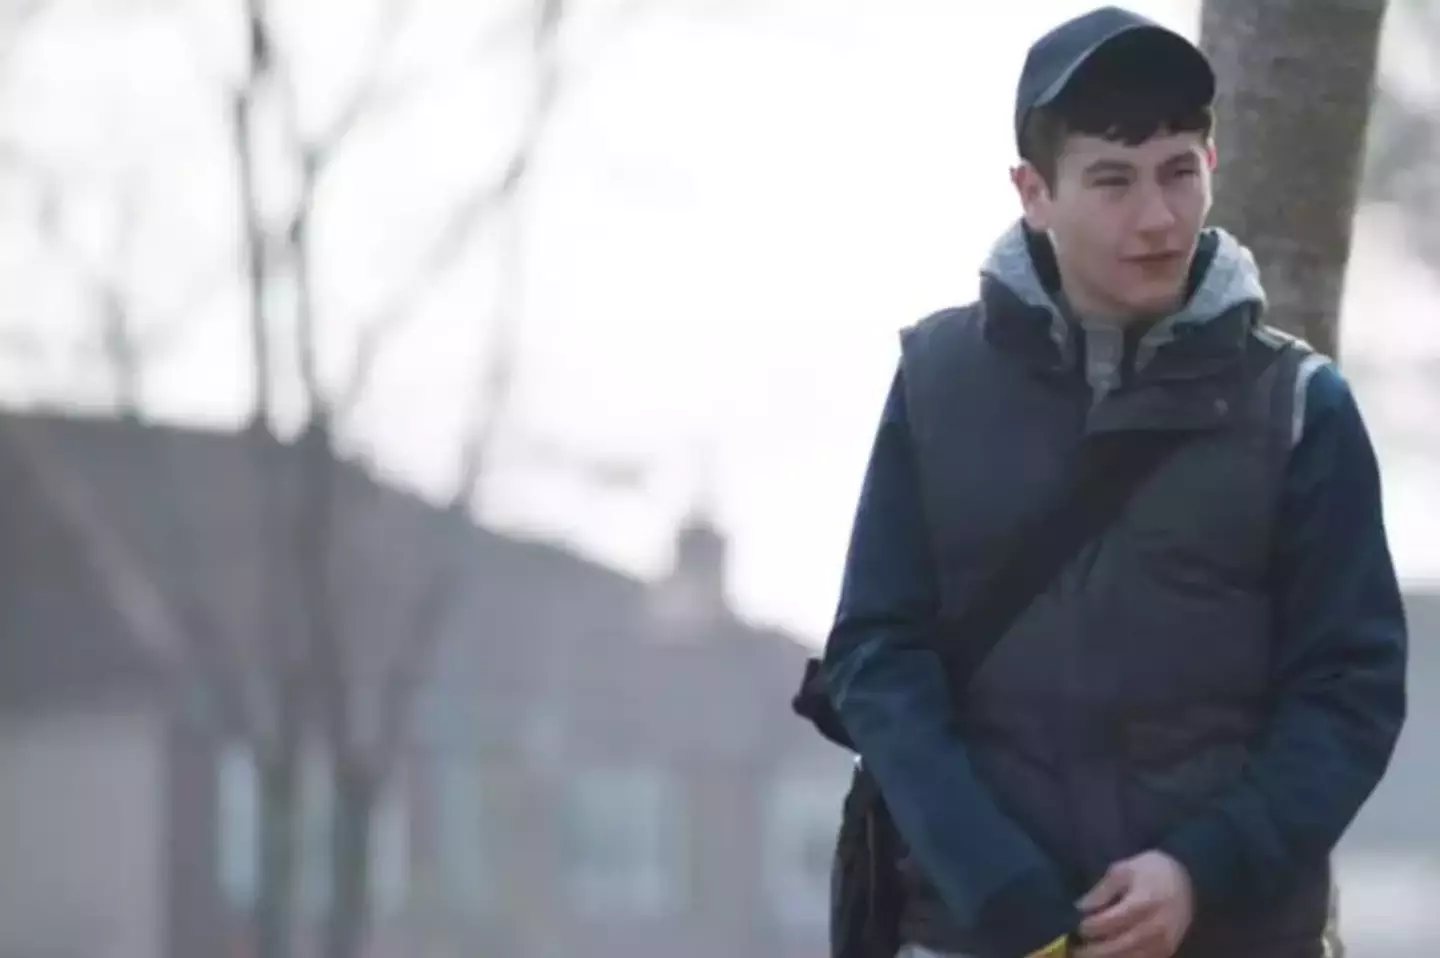 Love/Hate was one of Barry Keoghan's earlier pieces of acting.